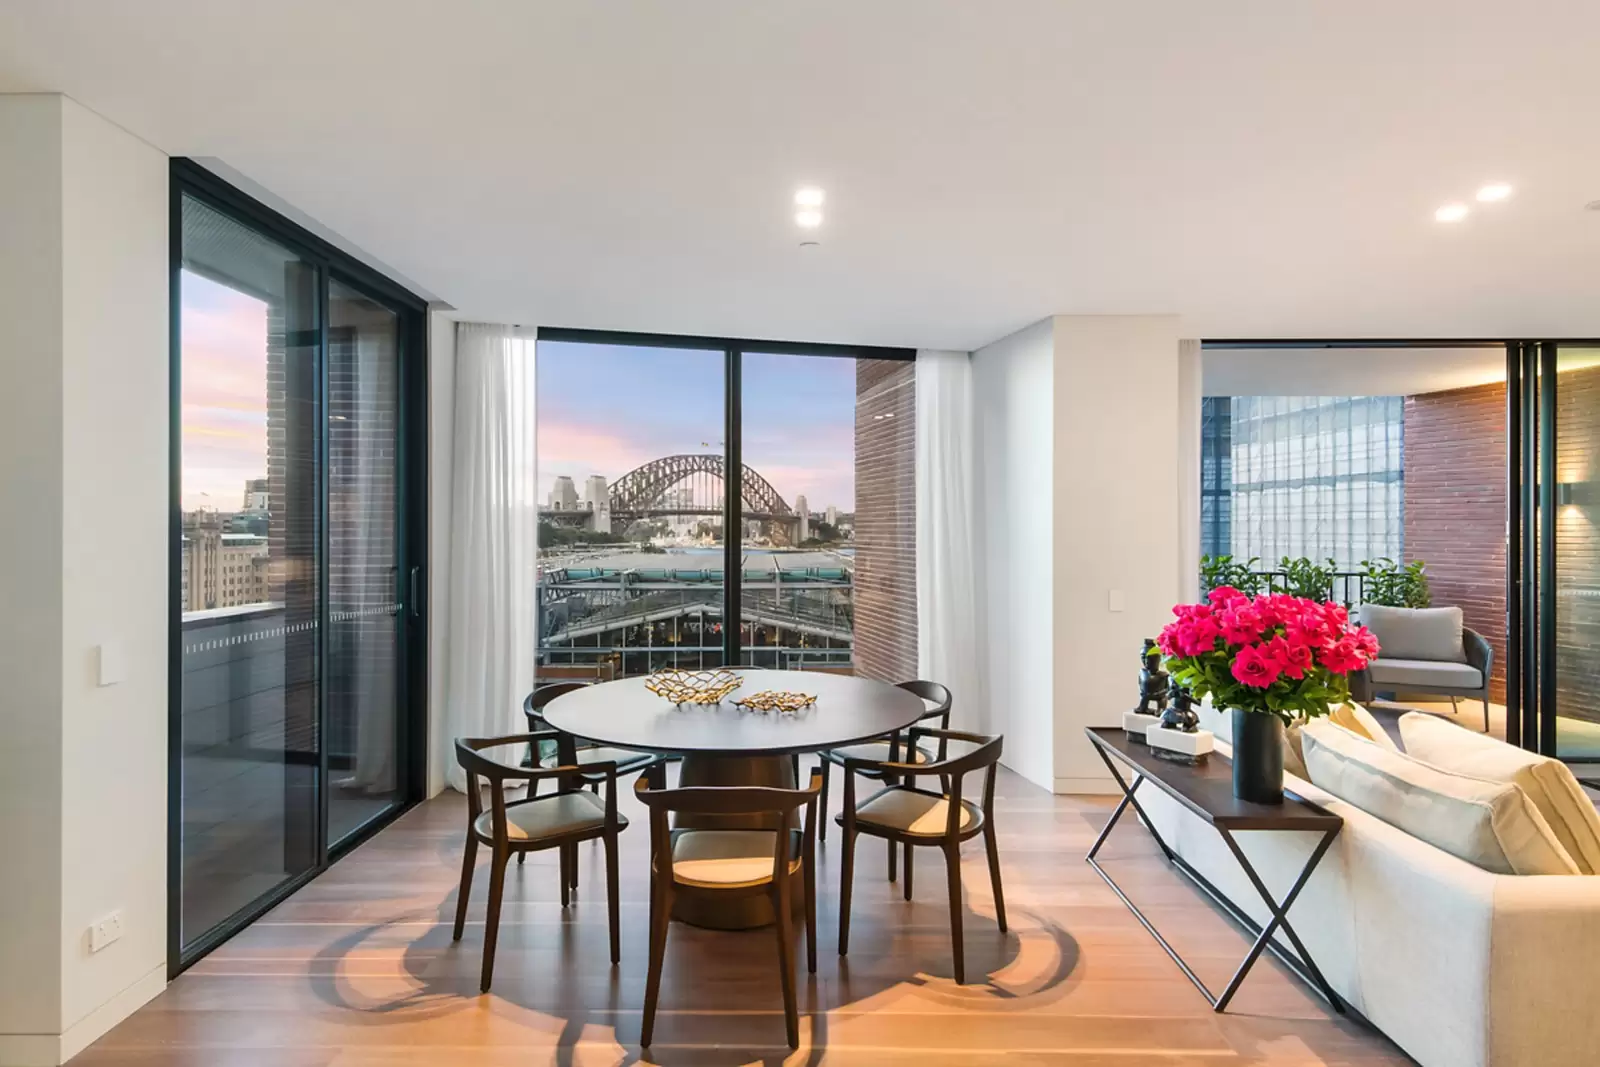 Photo #3: 801/15 Young Street, Sydney - Sold by Sydney Sotheby's International Realty